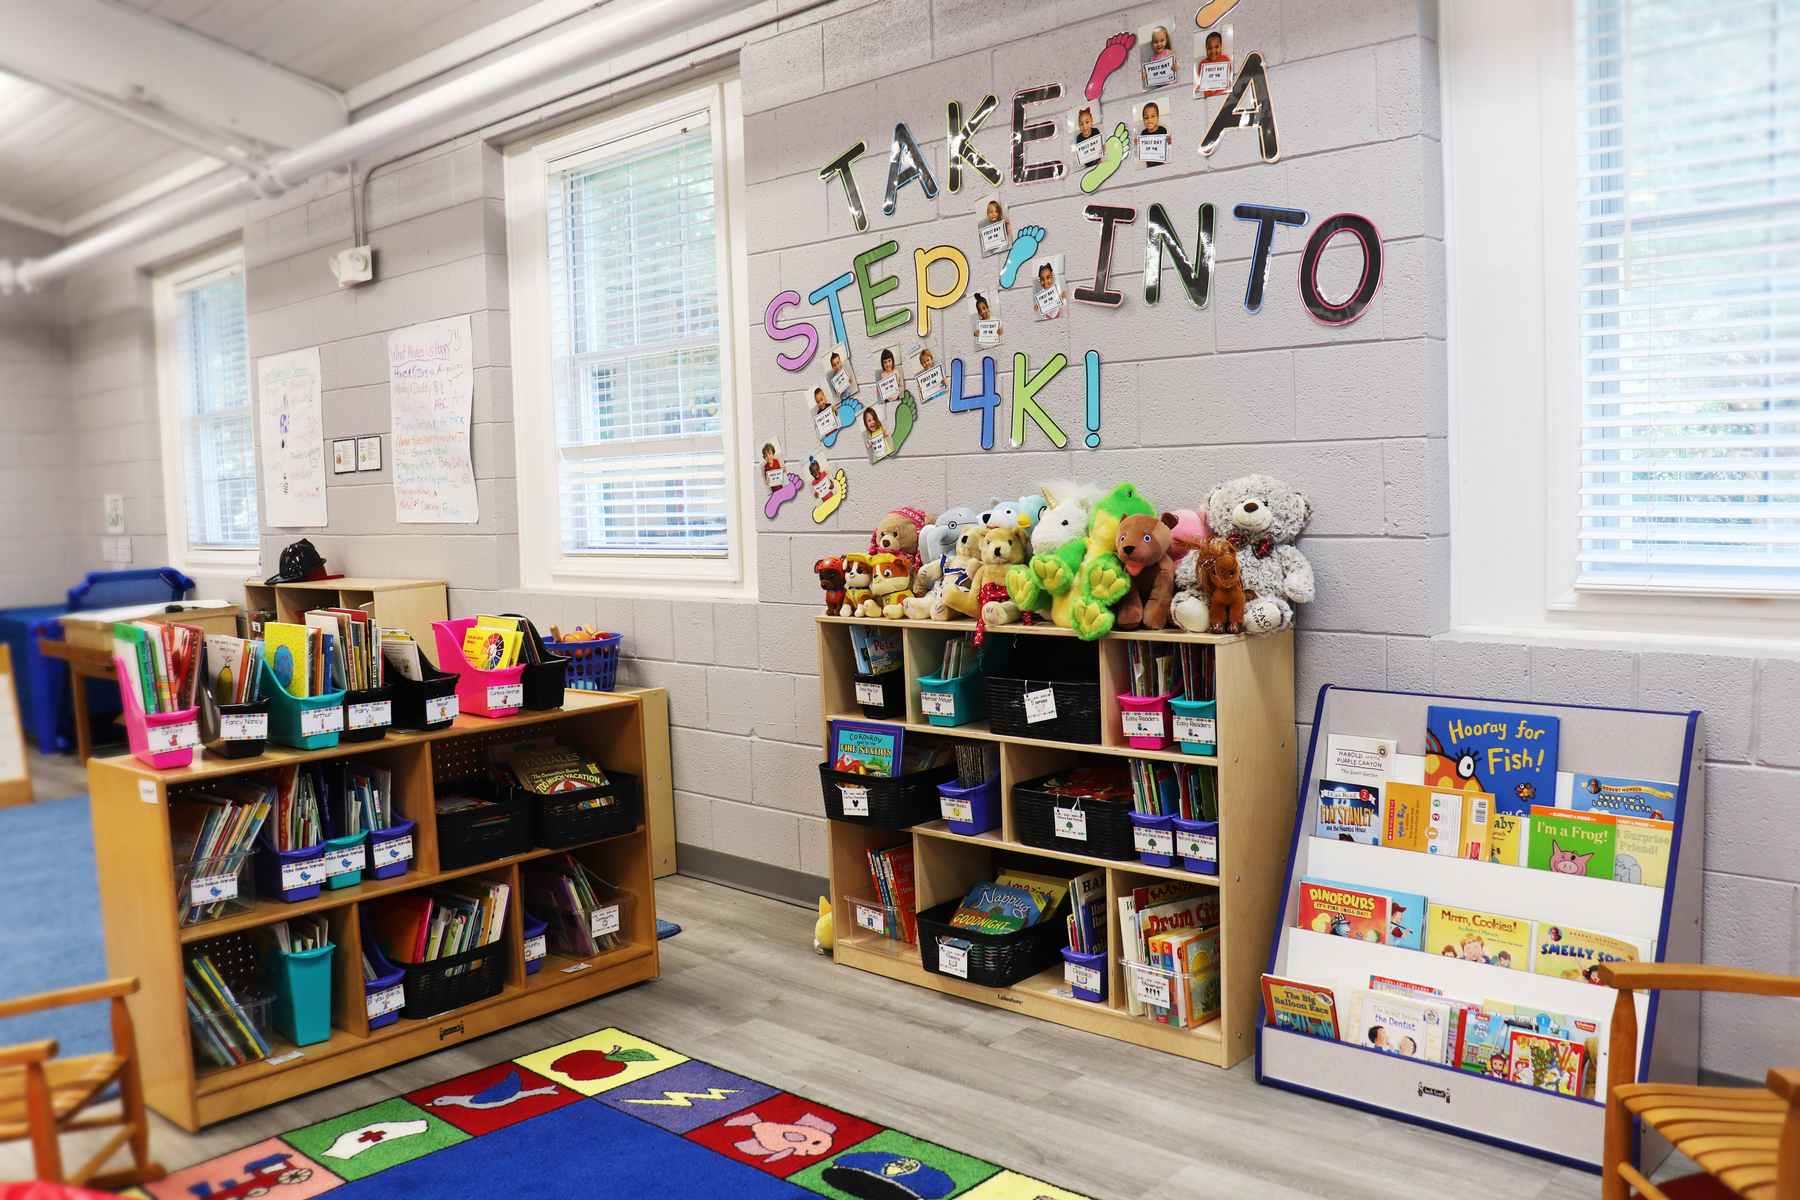 A 4K classroom at the Fort Lawn community center filled with shelves of children's books and stuffed animals. 